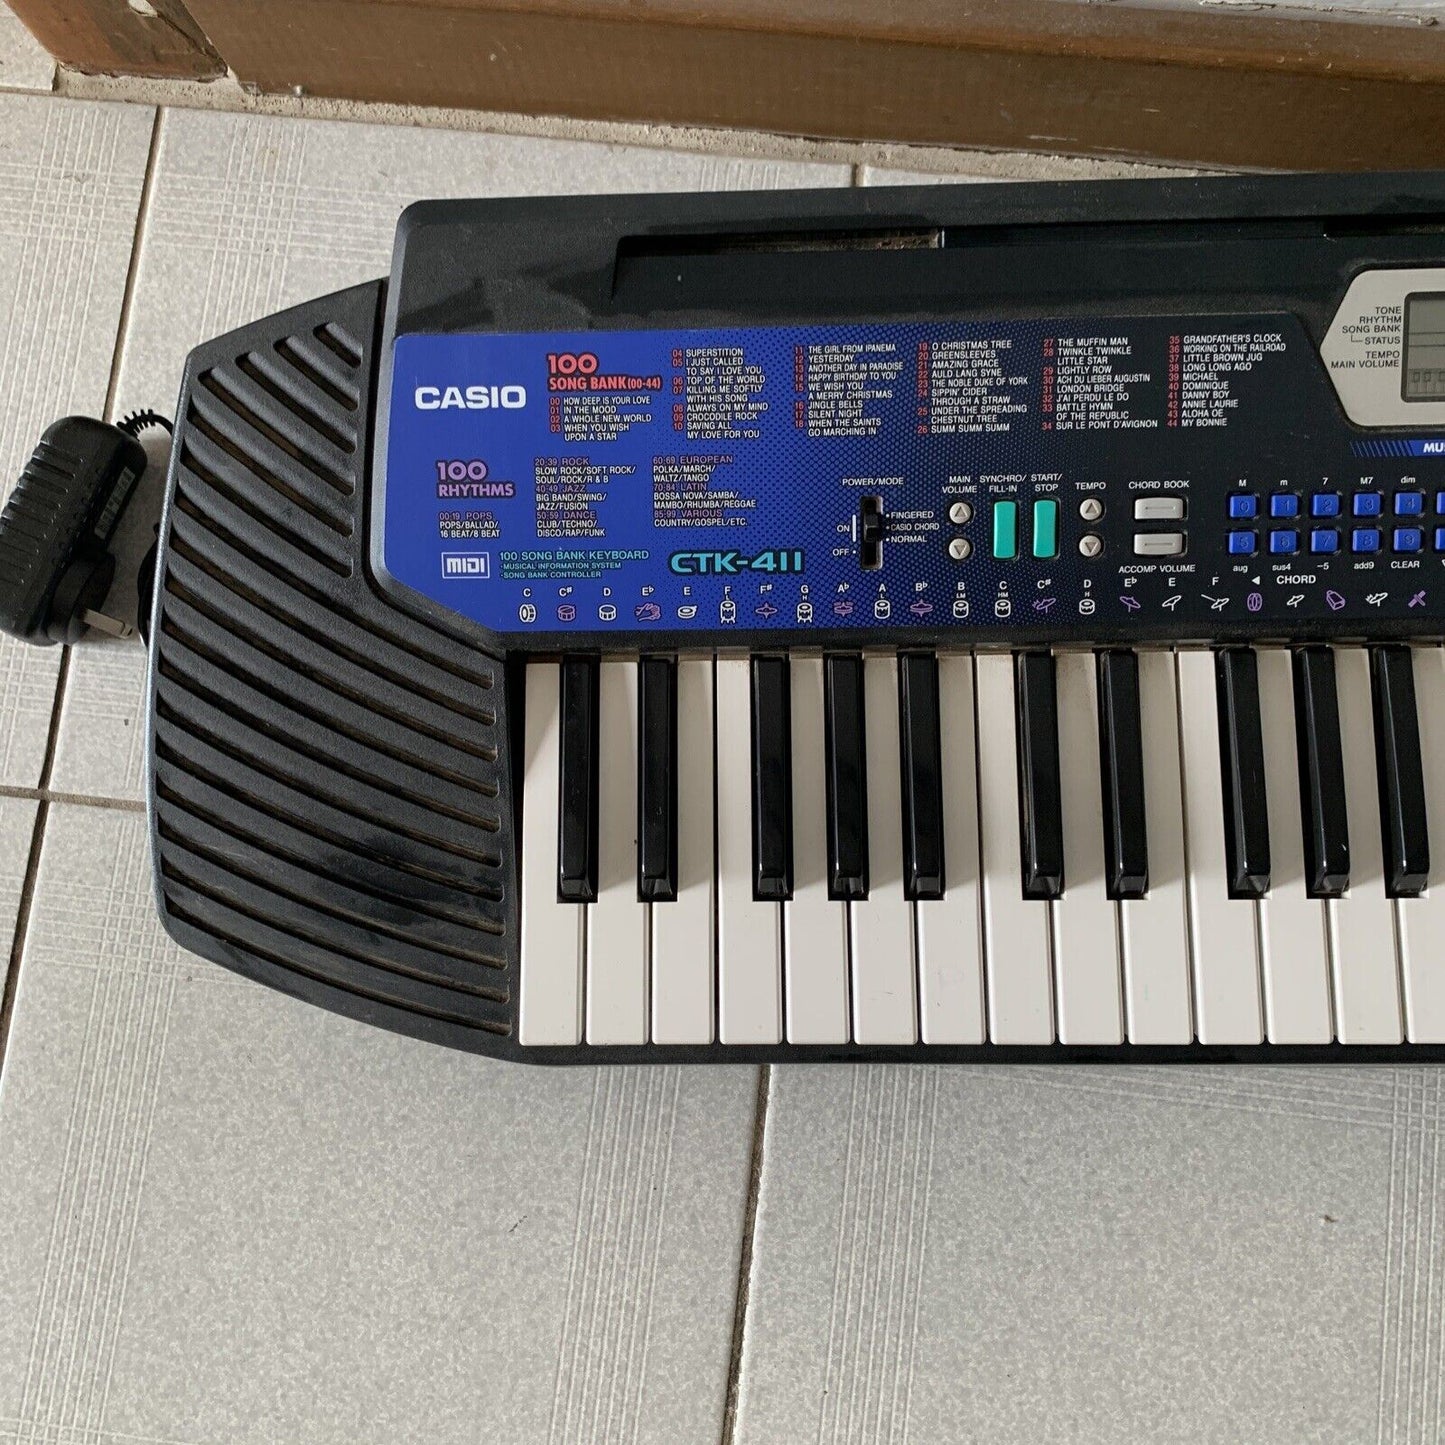 Casio CTK-411 MIDI Electronic Portable Musical Keyboard 100 Song + AC Adapter